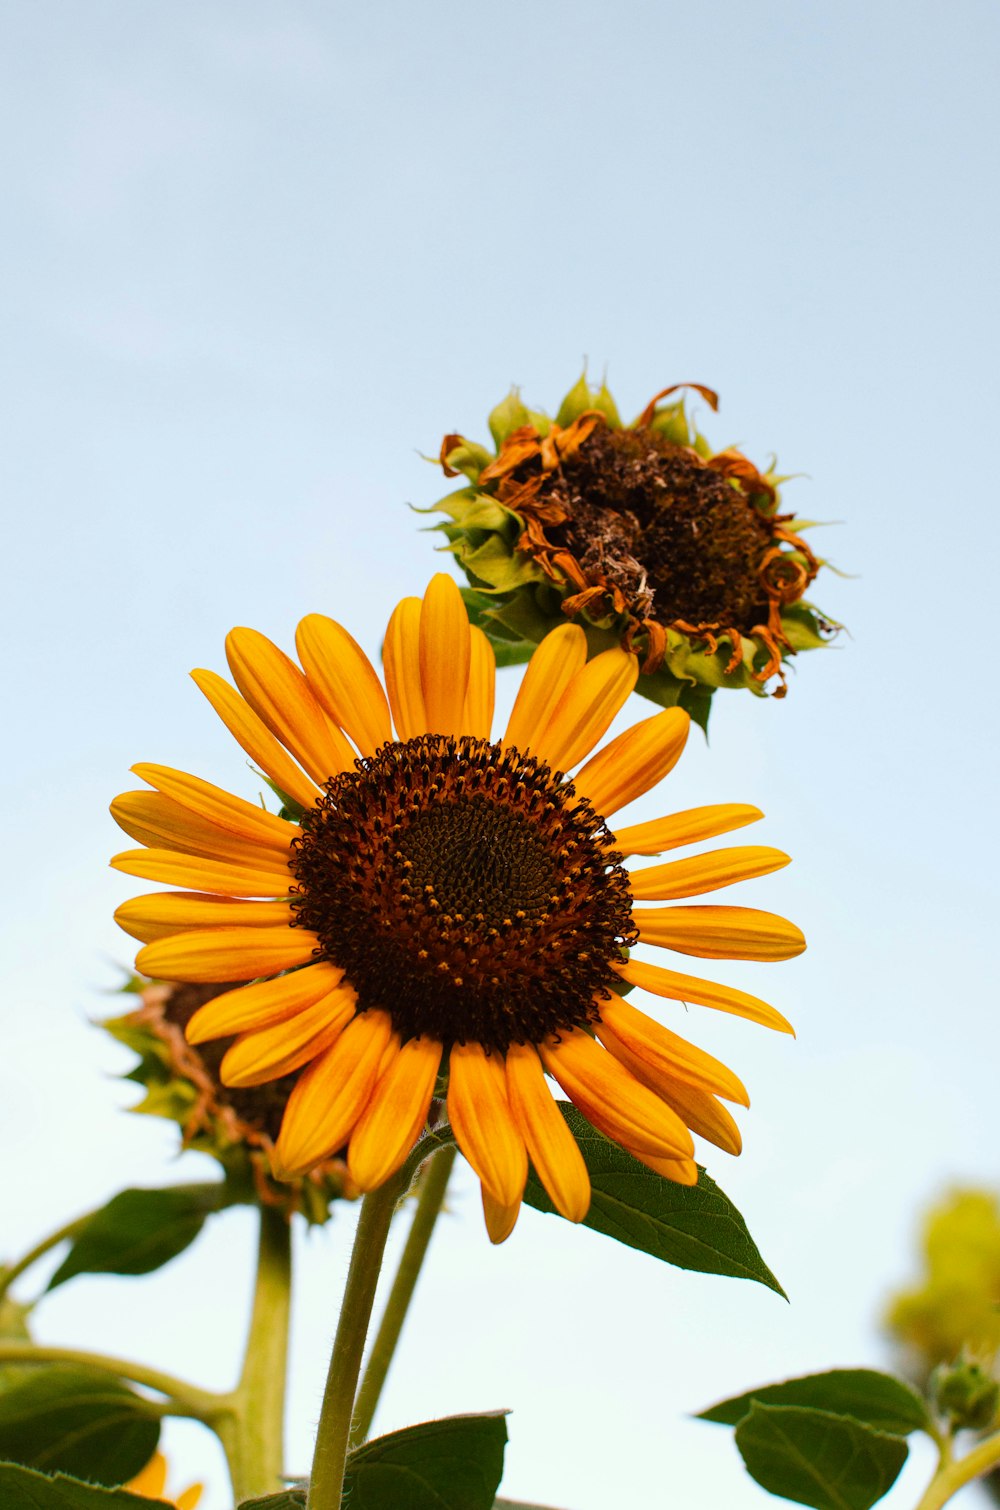 two sunflowers with a blue sky in the background